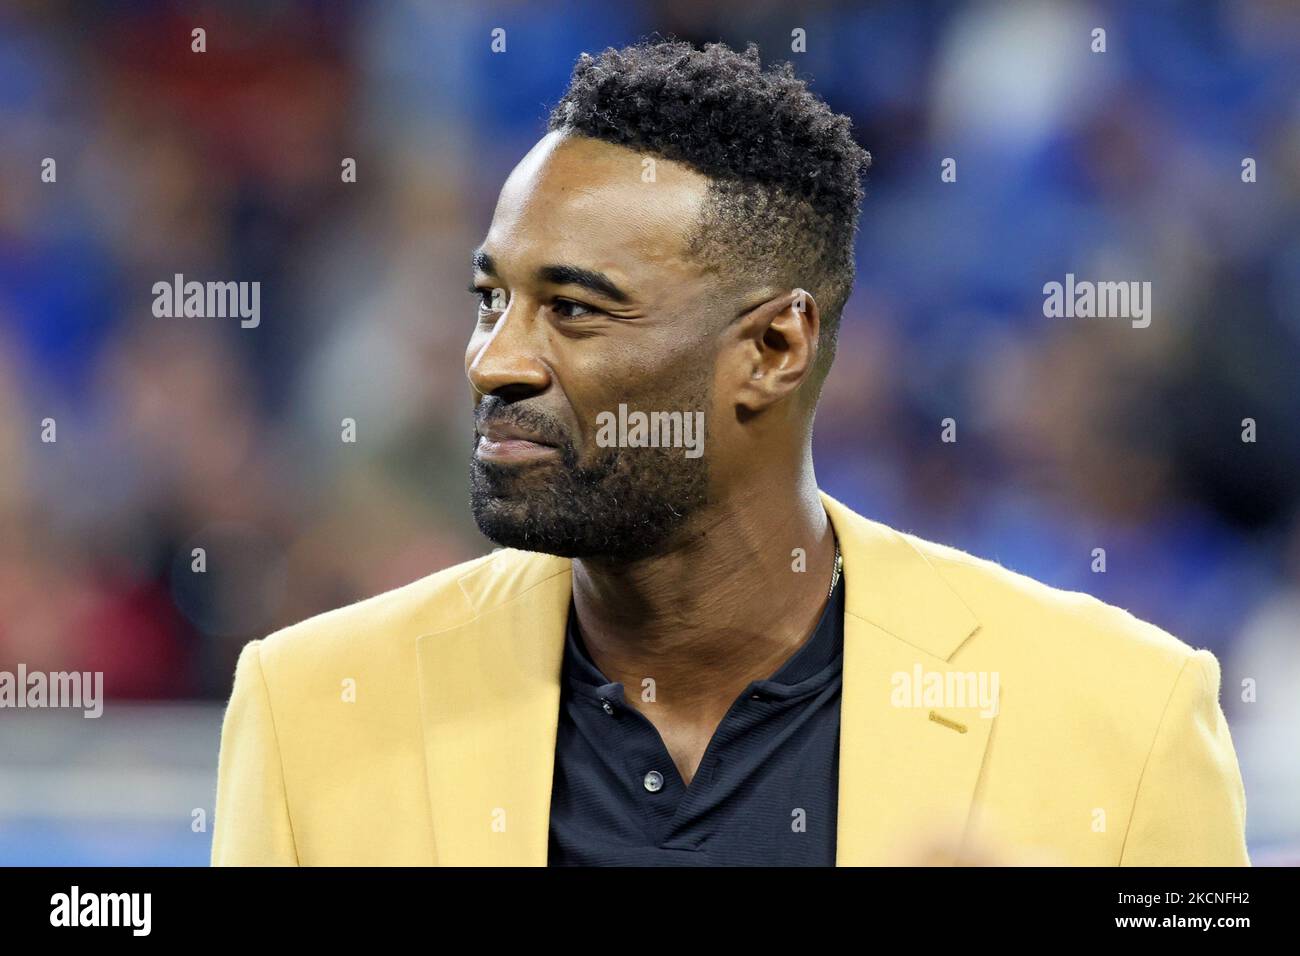 Former Detroit Lions wide receiver Calvin Johnson, Jr., “Megatron”, is honored after his recent induction into the Hall of Fame during a special ceremony during halftime of an NFL football game between the Detroit Lions and the Baltimore Ravens in Detroit, Michigan USA, on Sunday, September 26, 2021. (Photo by Amy Lemus/NurPhoto) Stock Photo